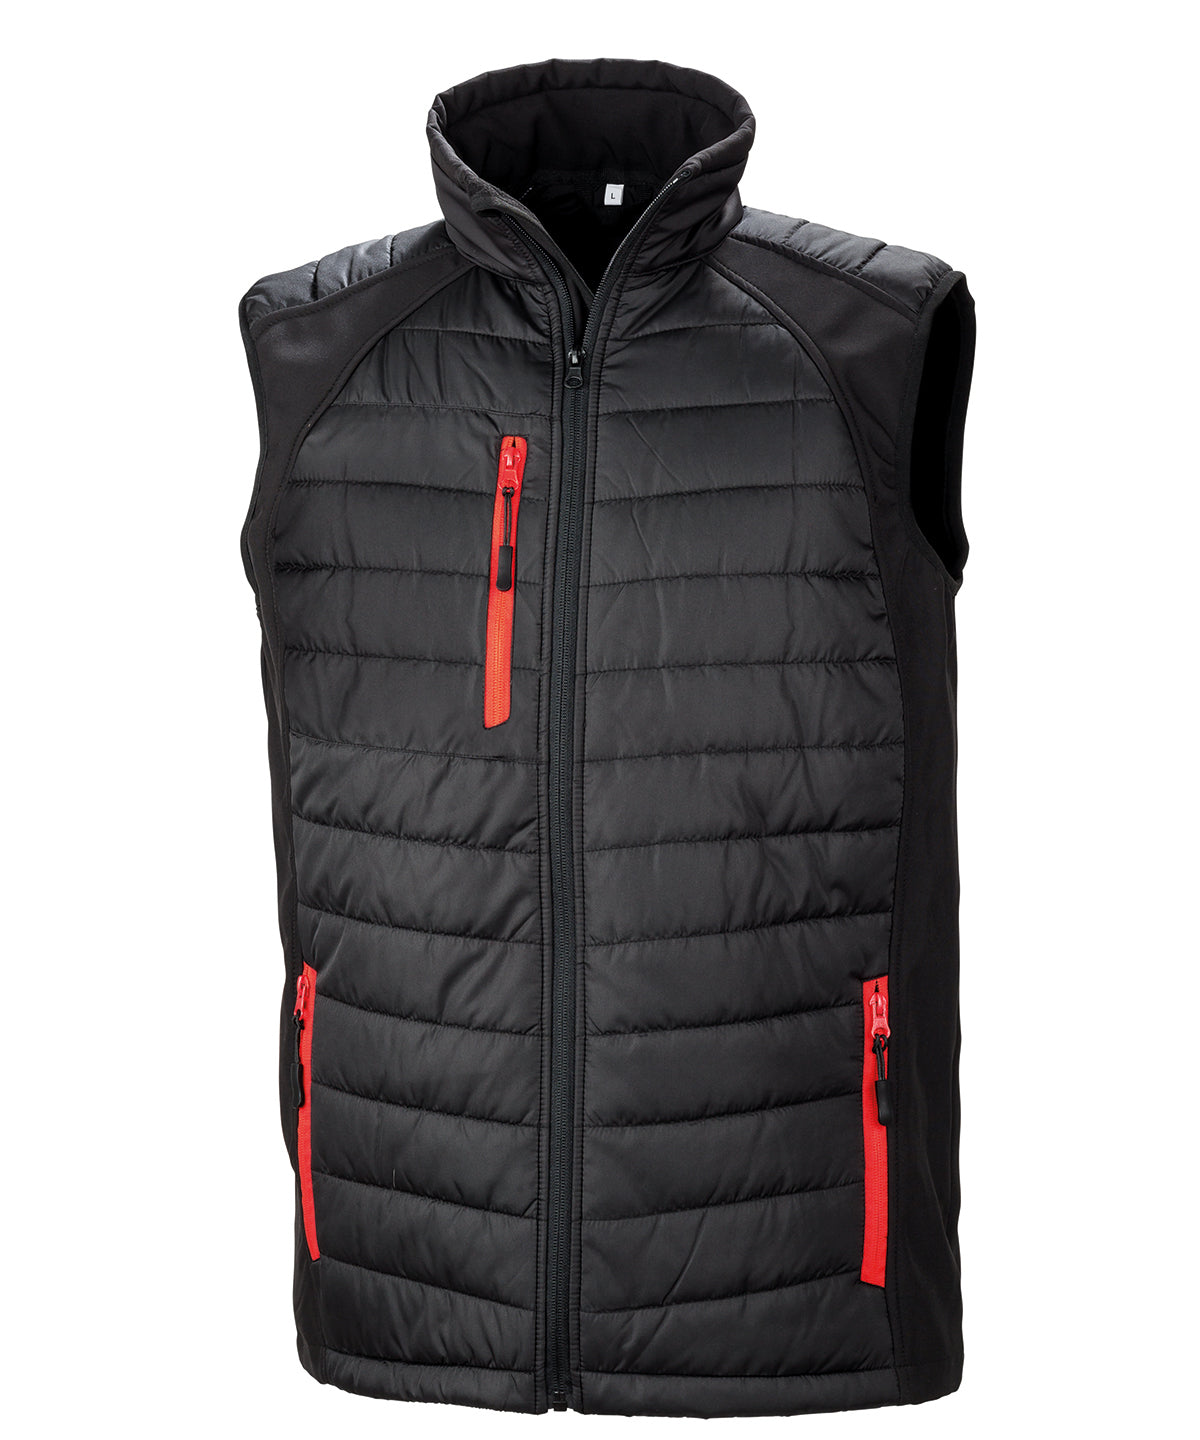 Gilets - Fleece, Shell, Quilted